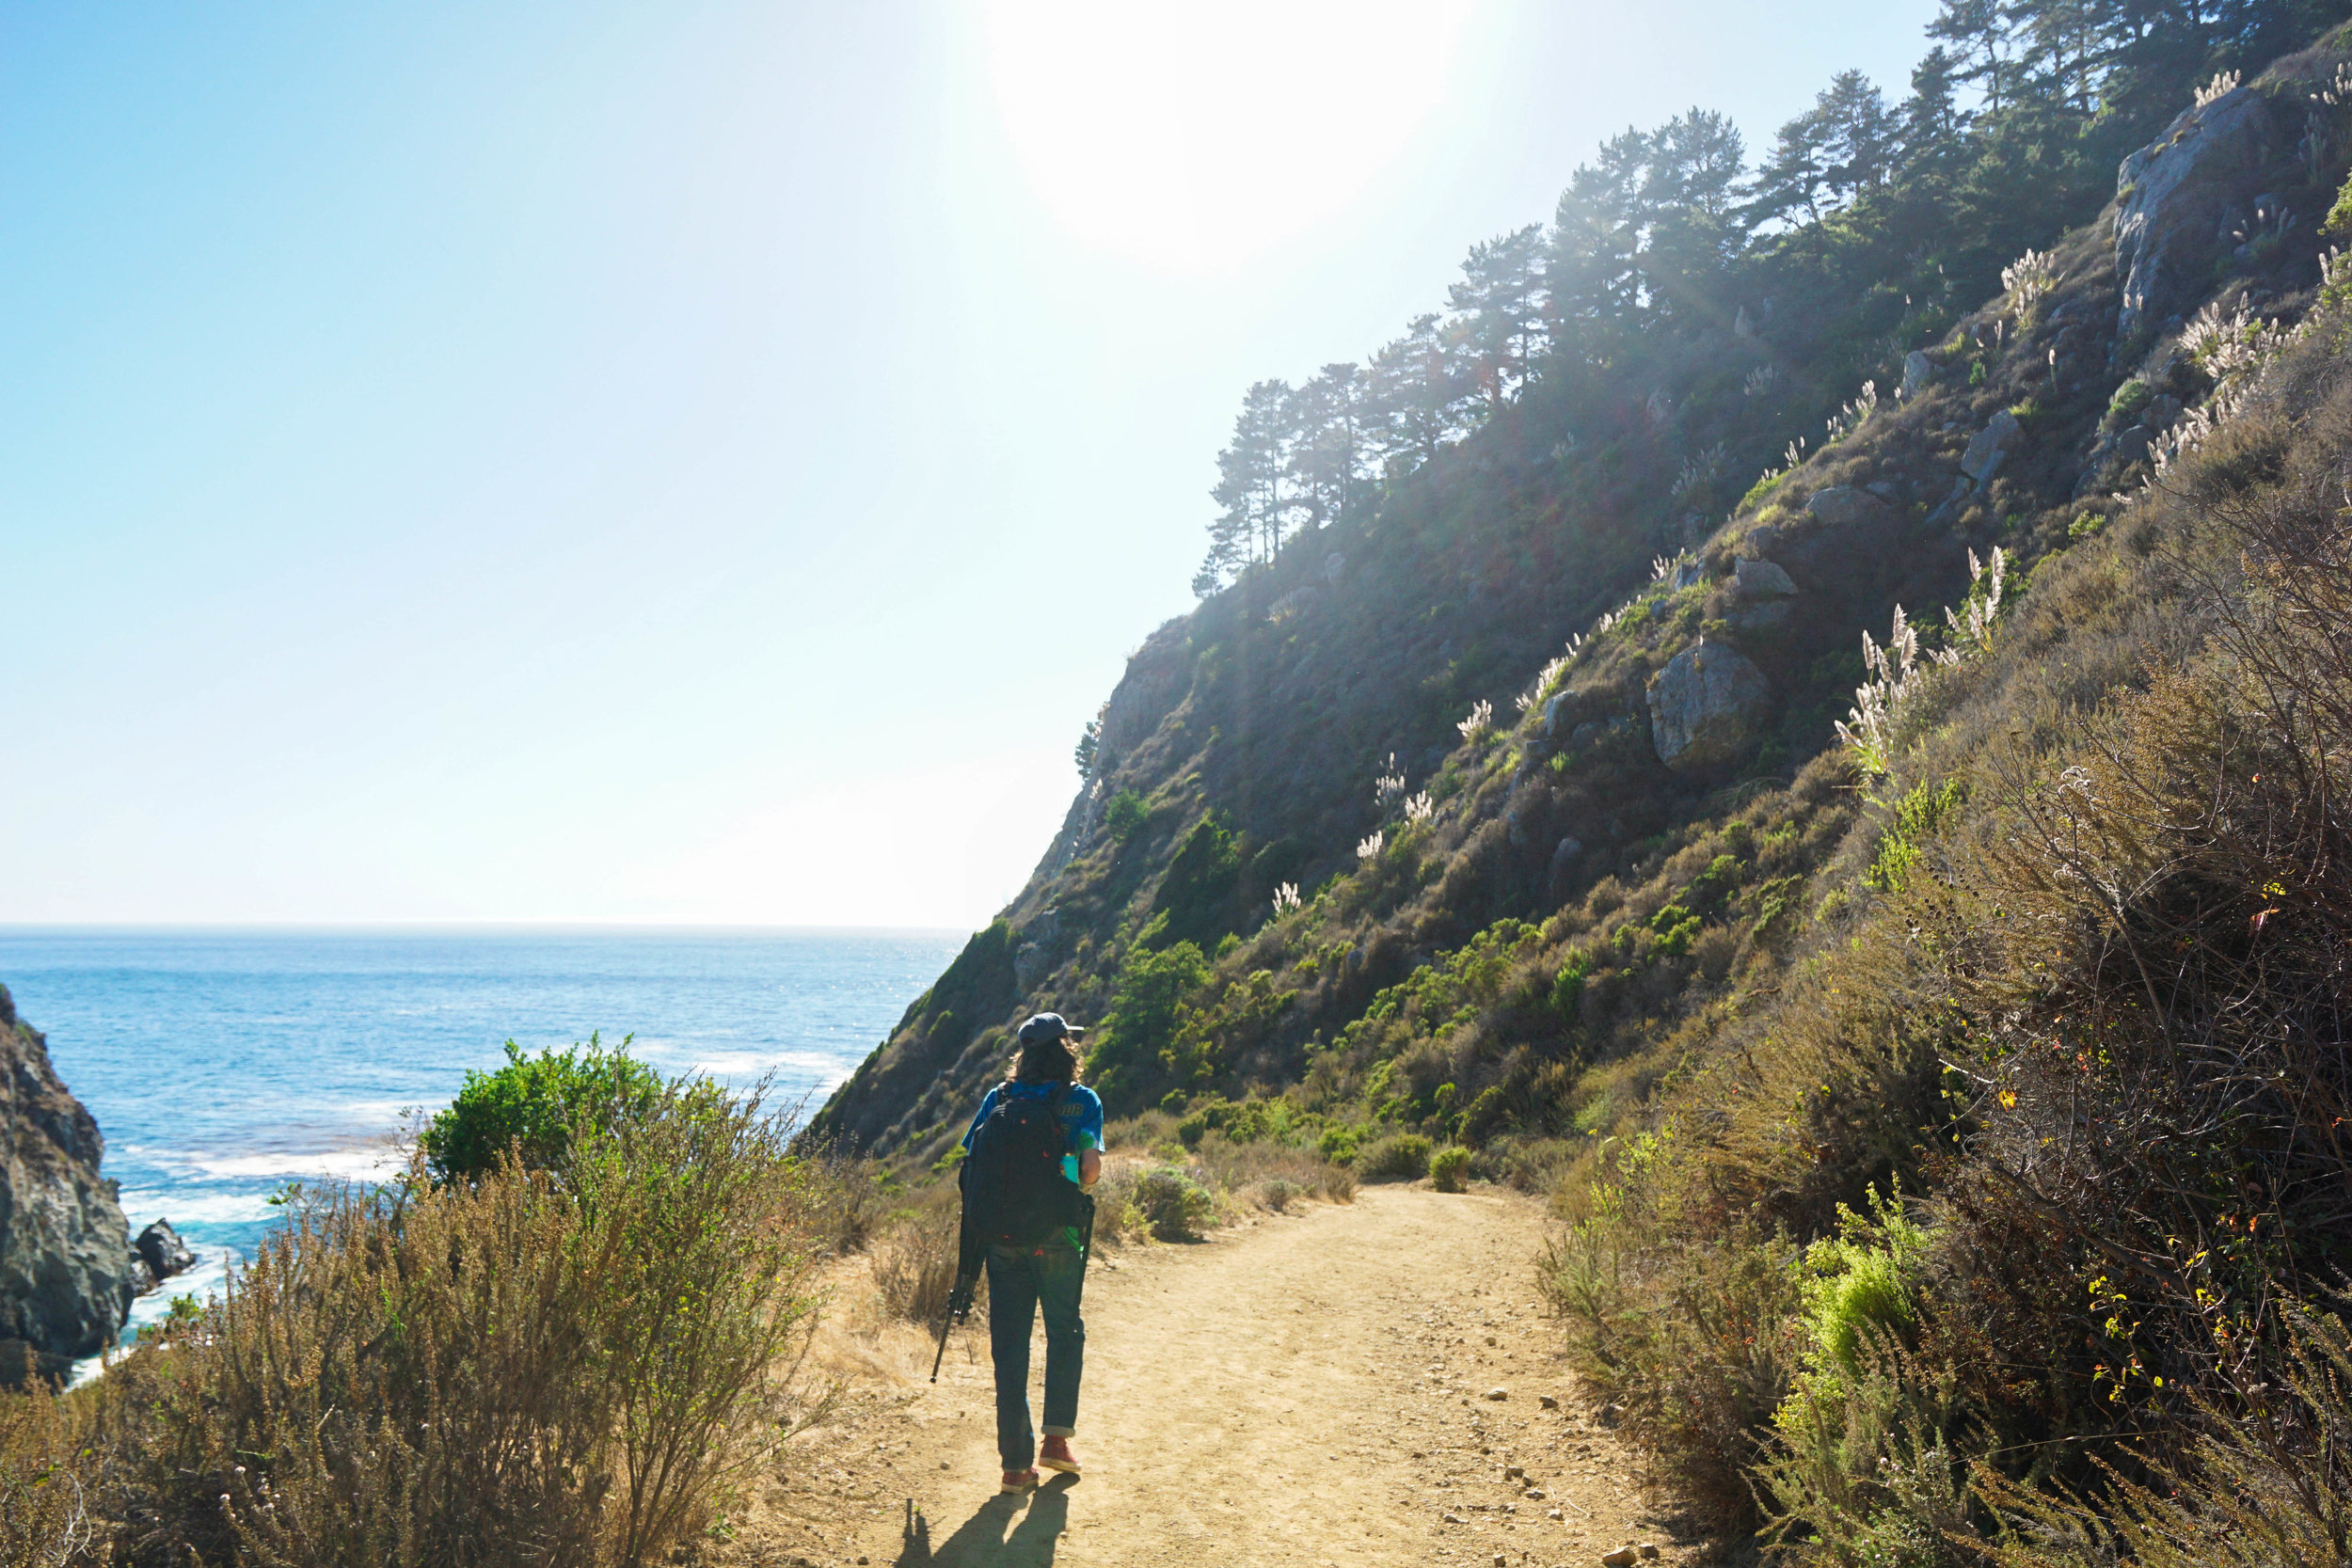 After leaving the forest, we find a new trail & head to a new segment of coastline.